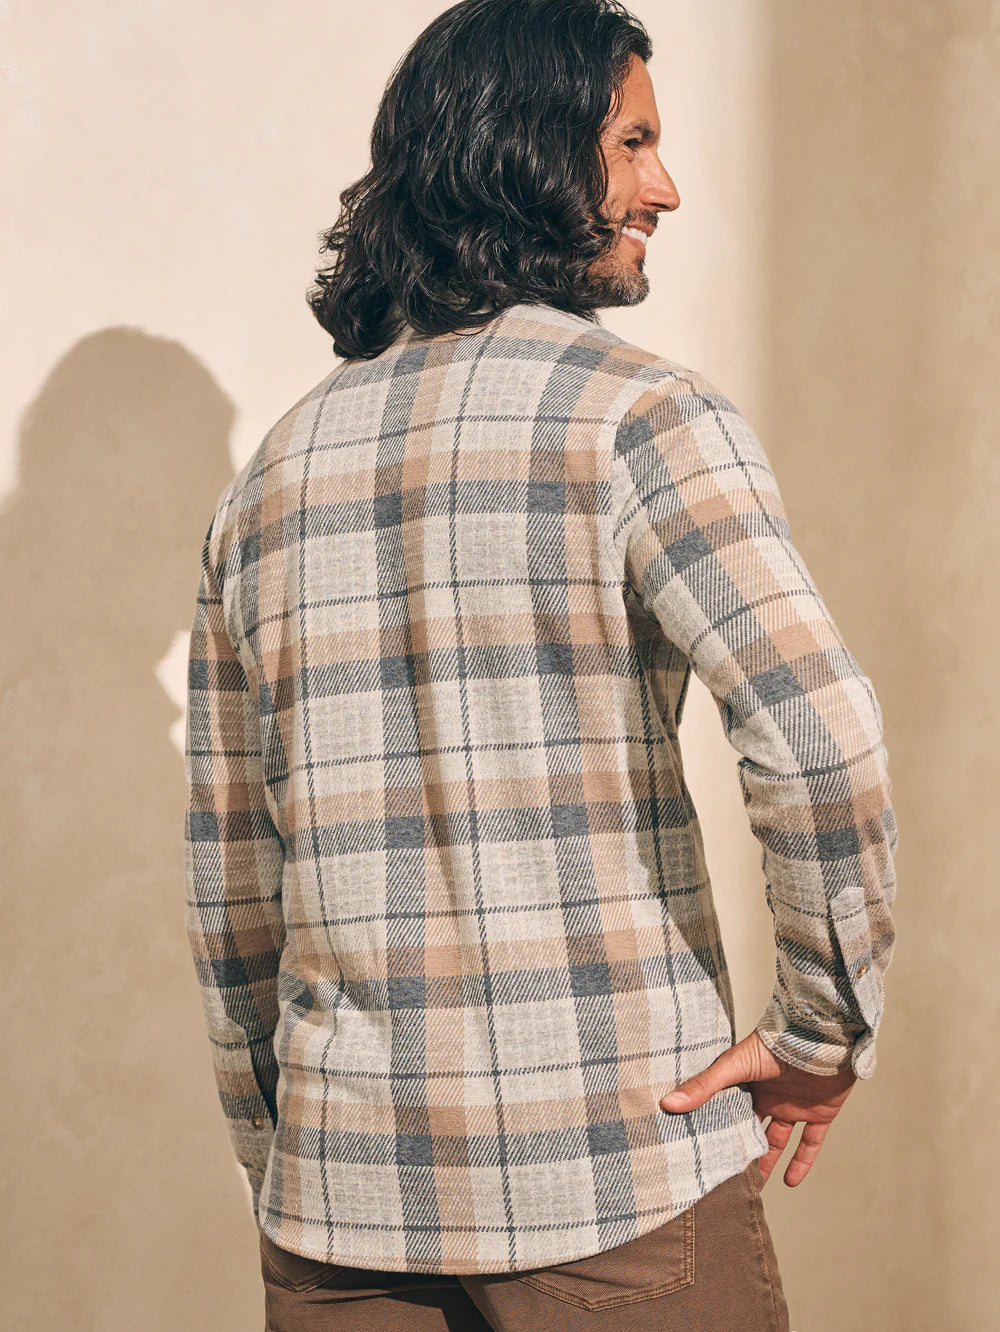 Faherty Legend Sweater Shirt Western Outpost Plaid